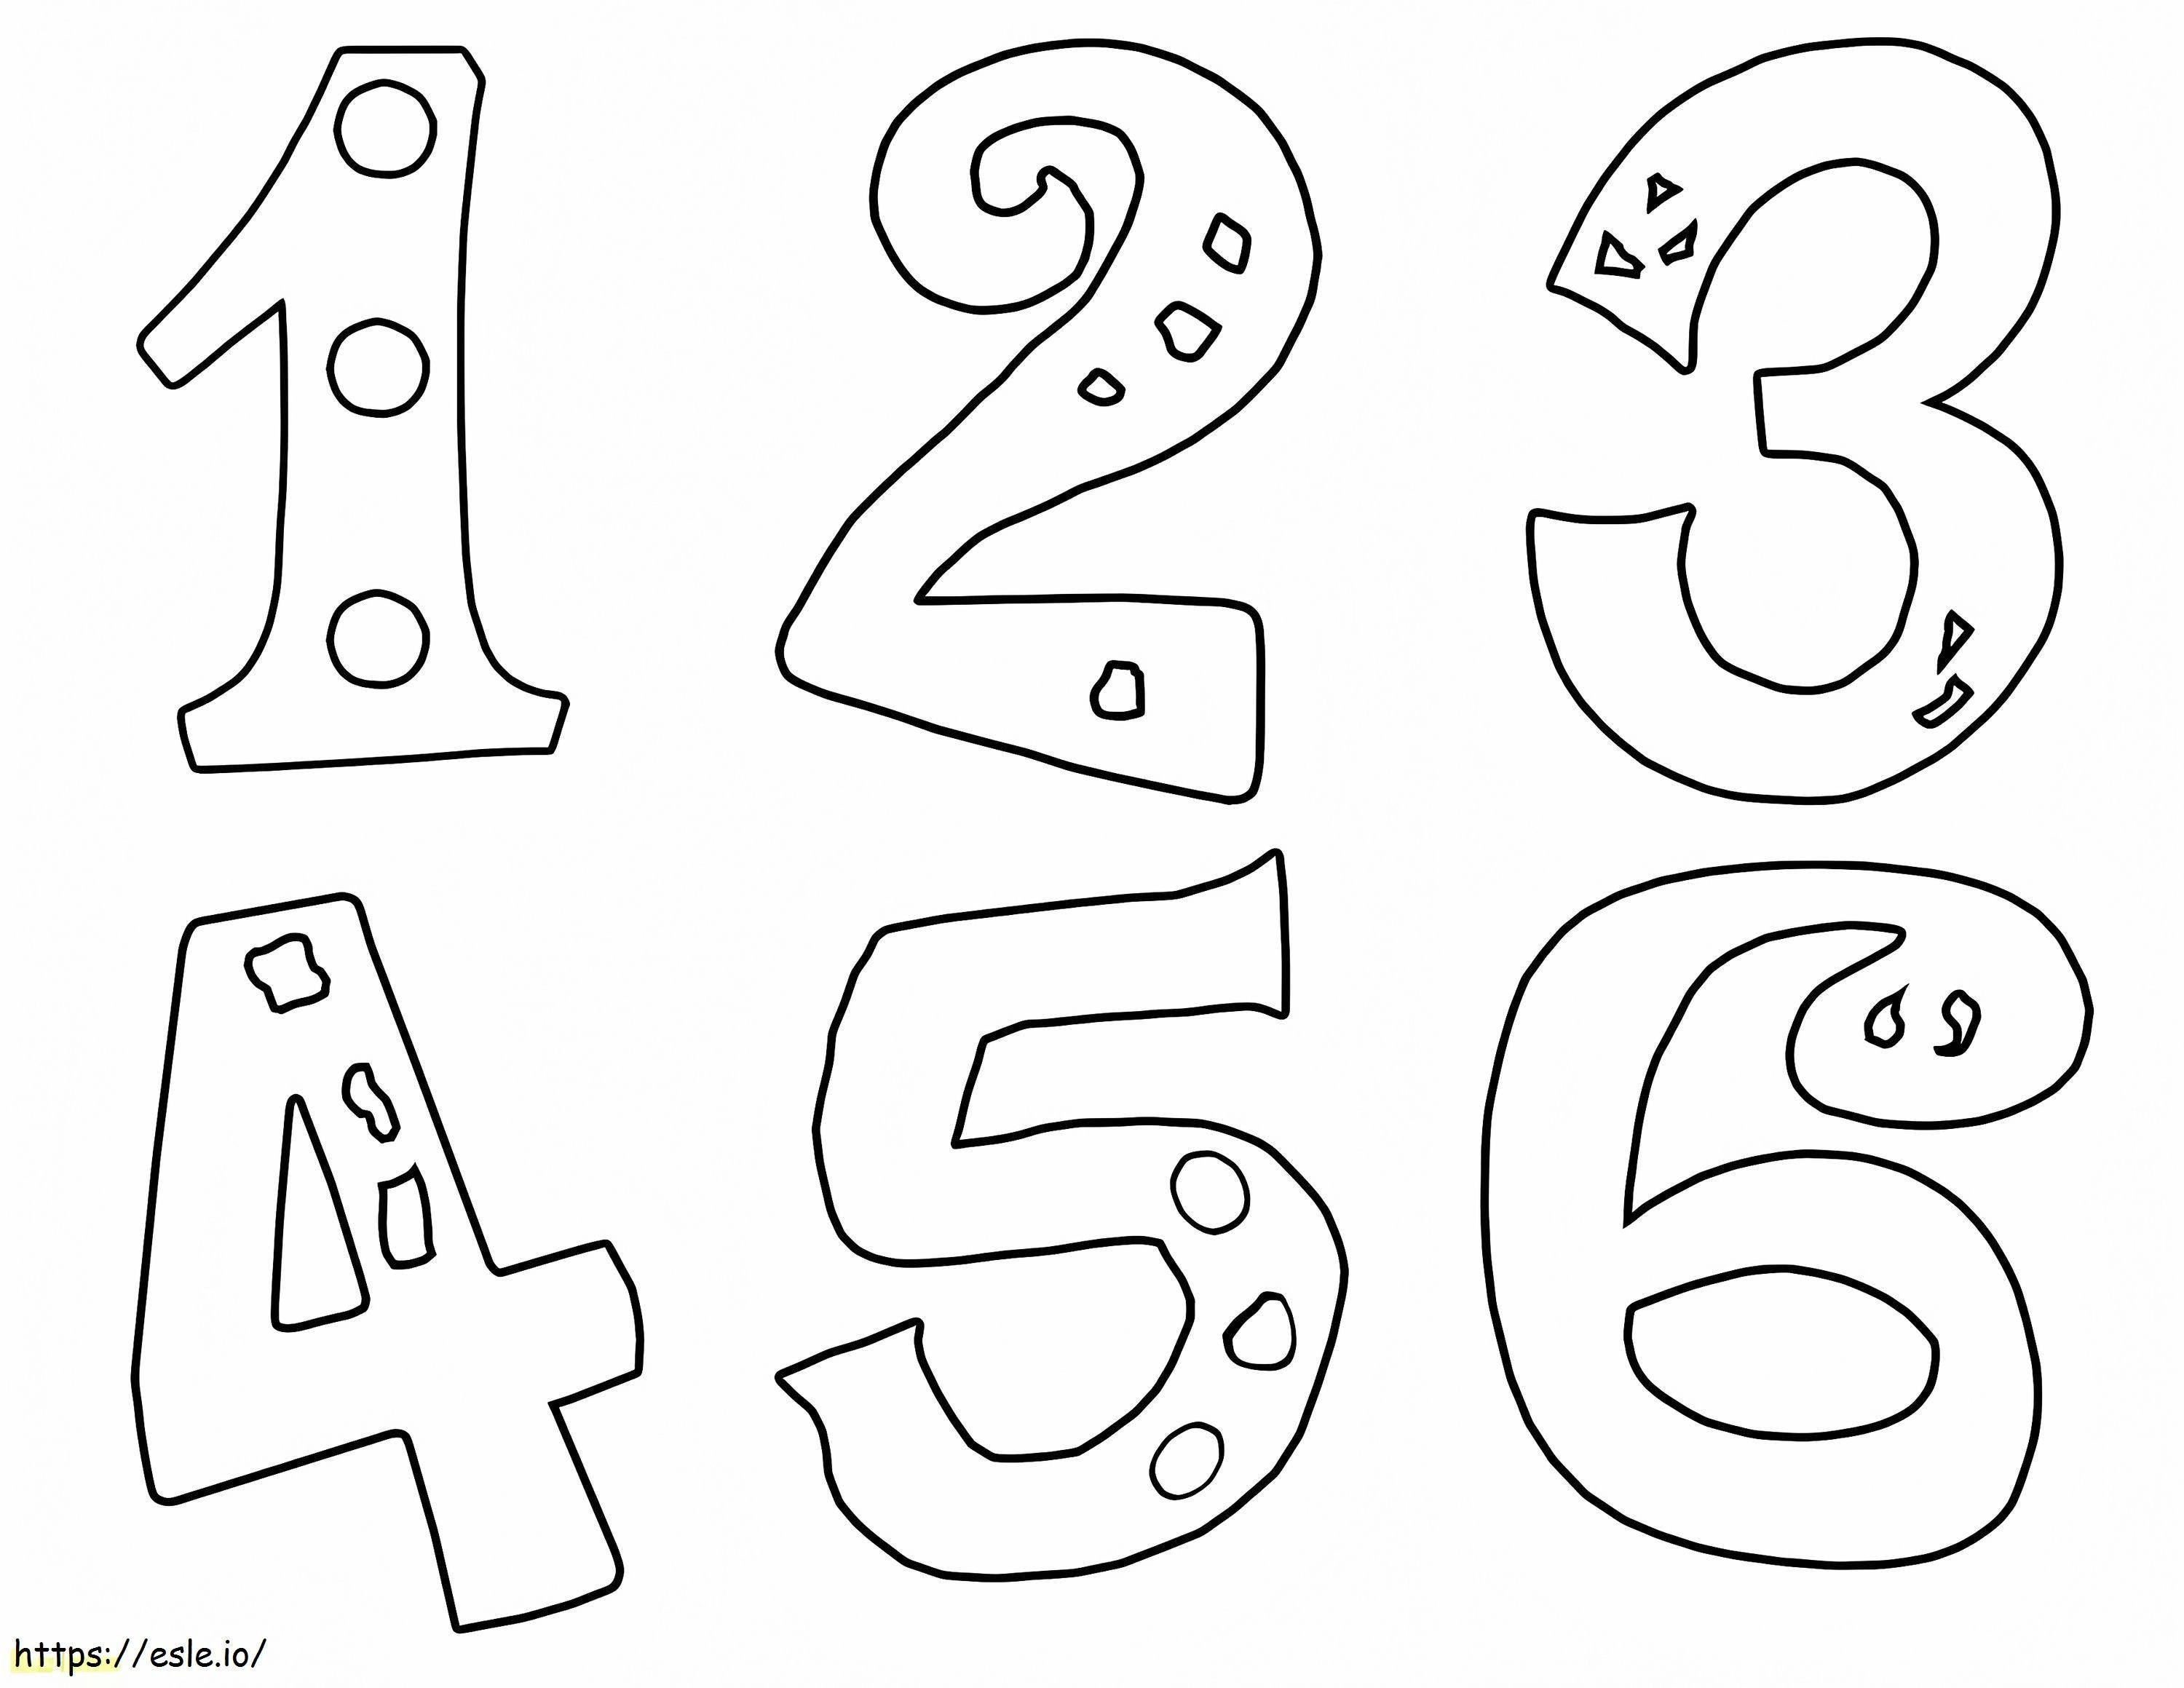 1573172909 Remarkable Number Pages Free Printable For Preschool The Farm Animals coloring page